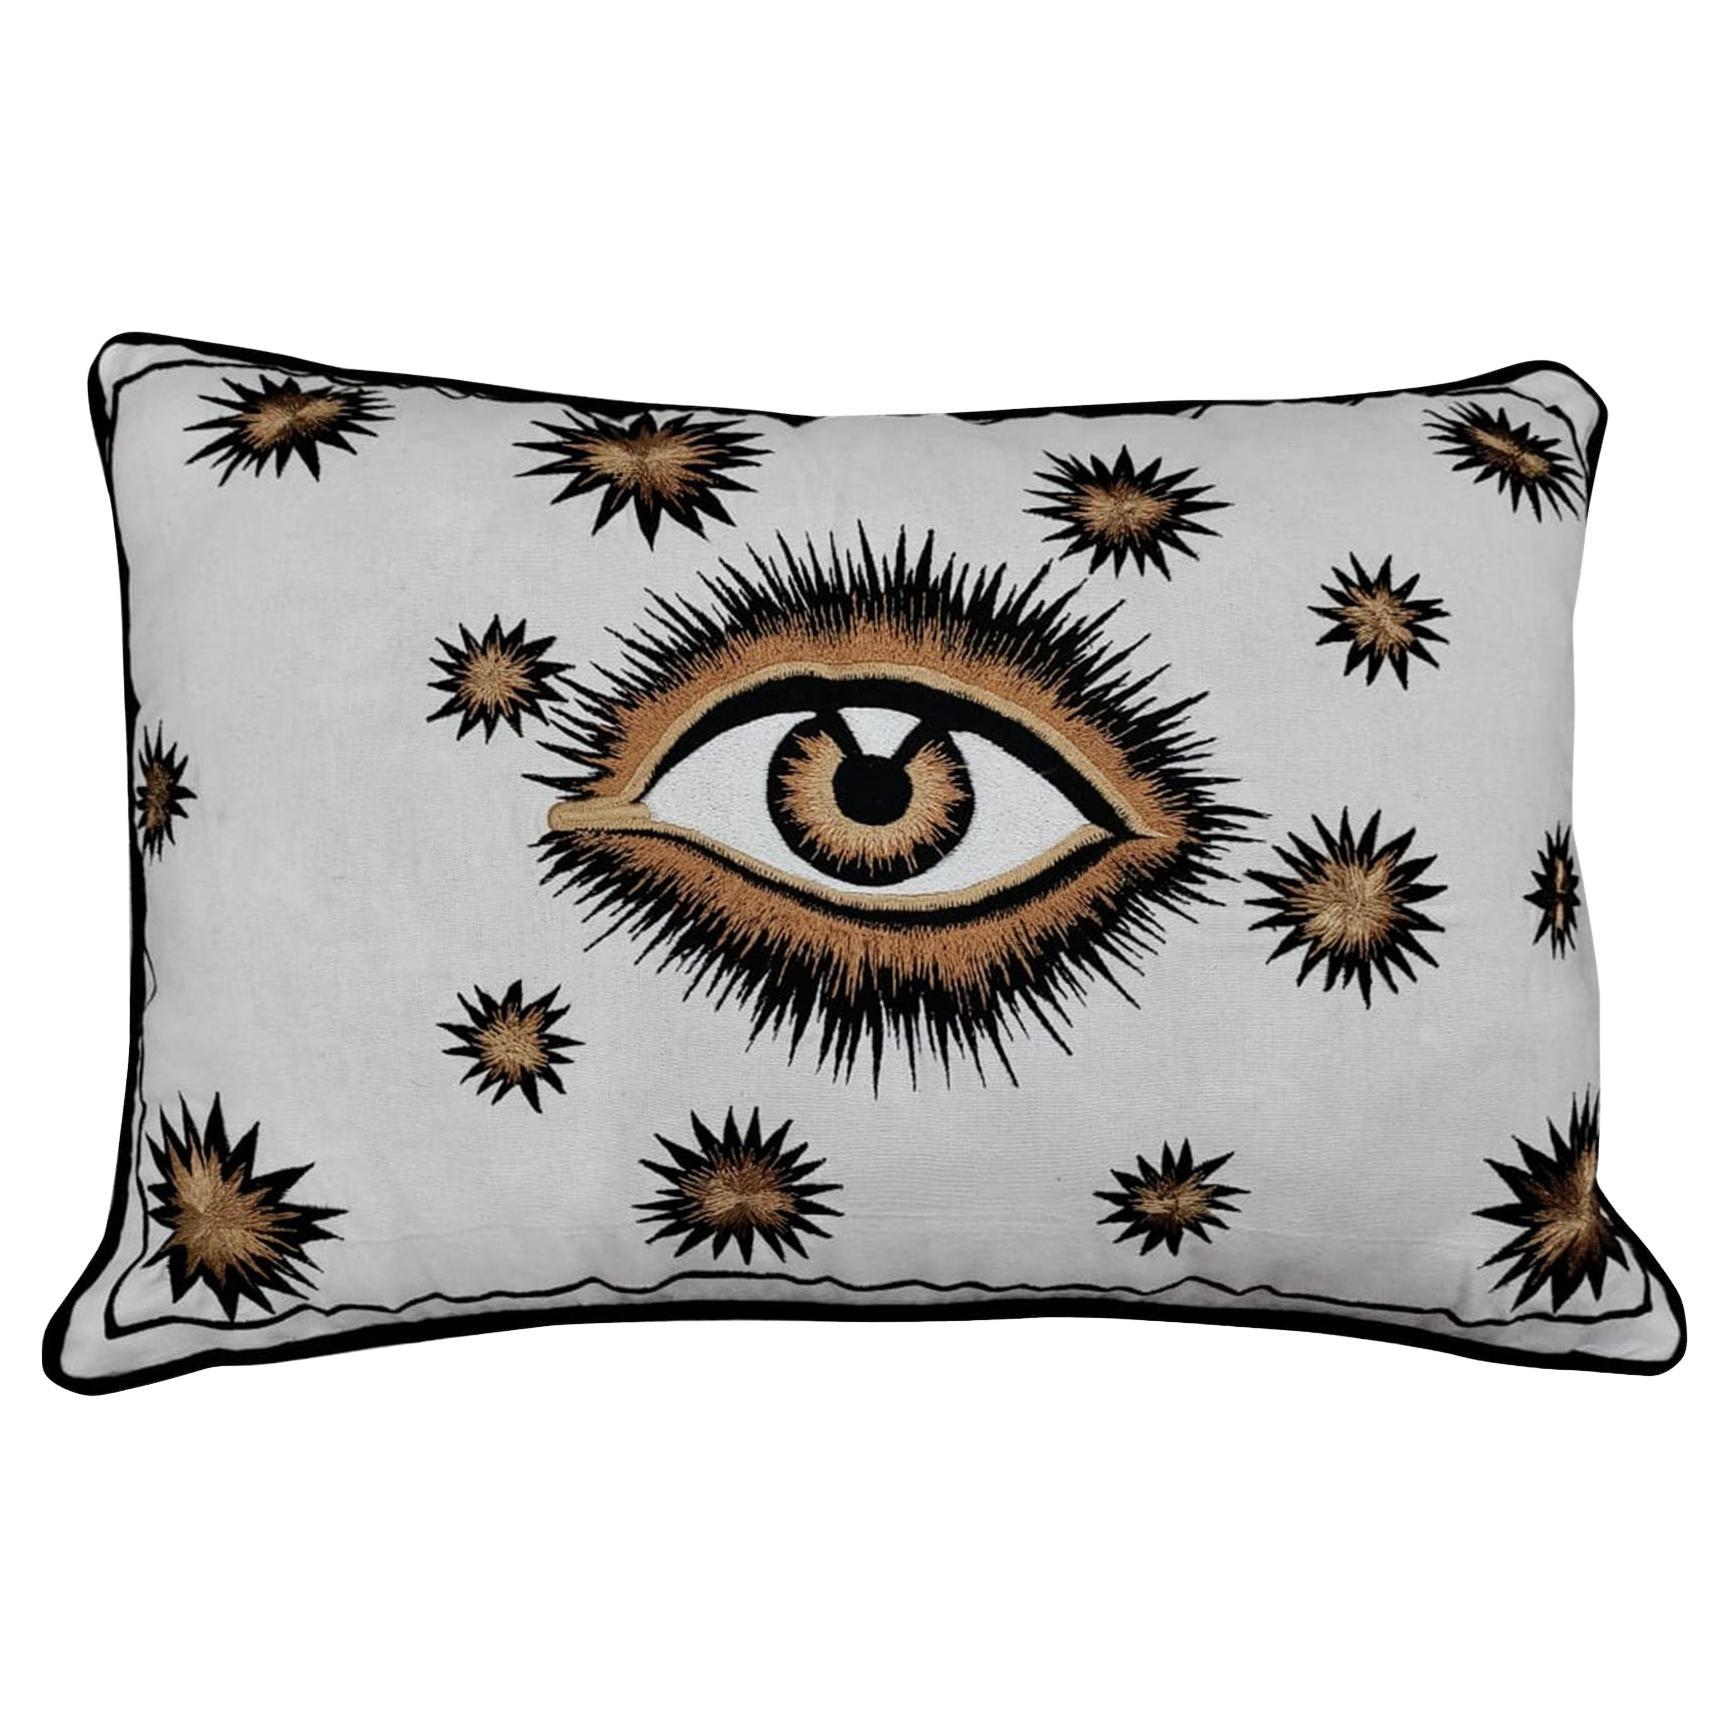 Eye Handembroidered Pillow For Sale